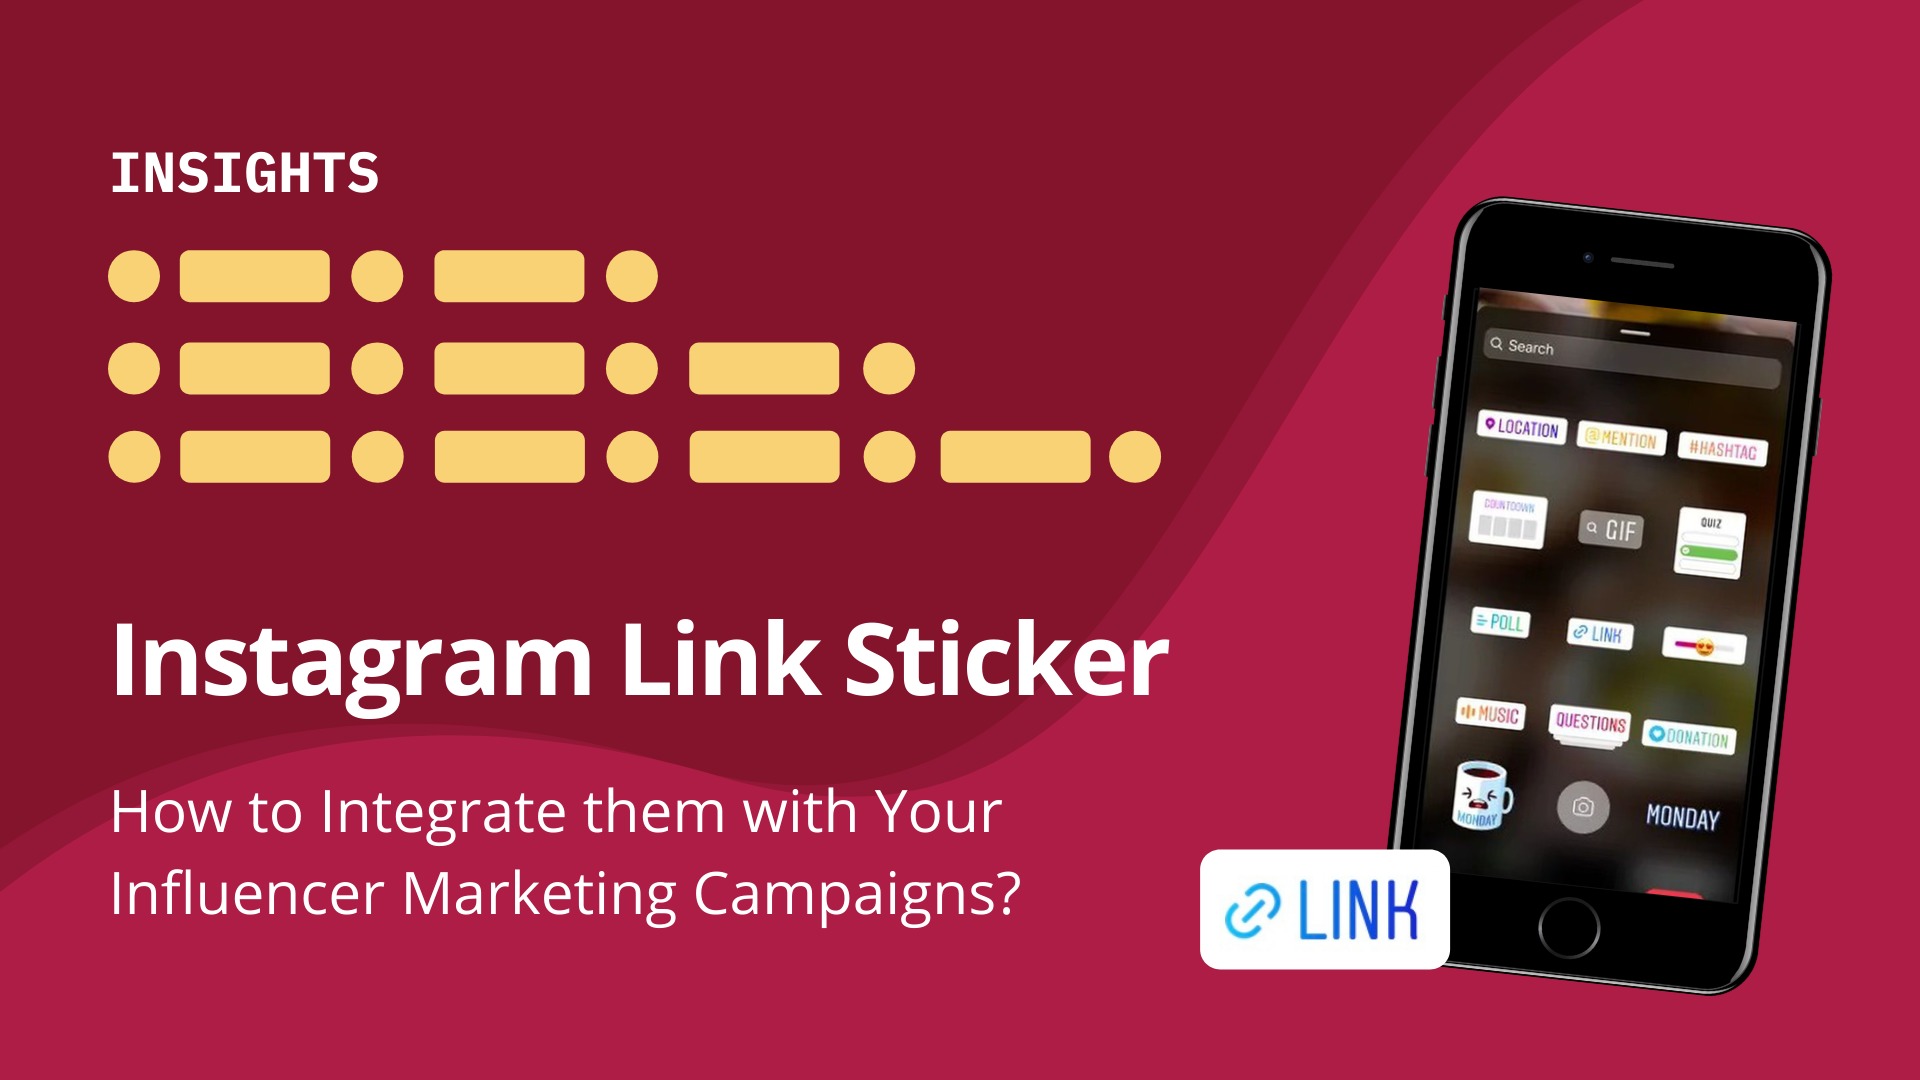 Instagram Link Sticker: How to Integrate them with Your Influencer Marketing Campaigns? image